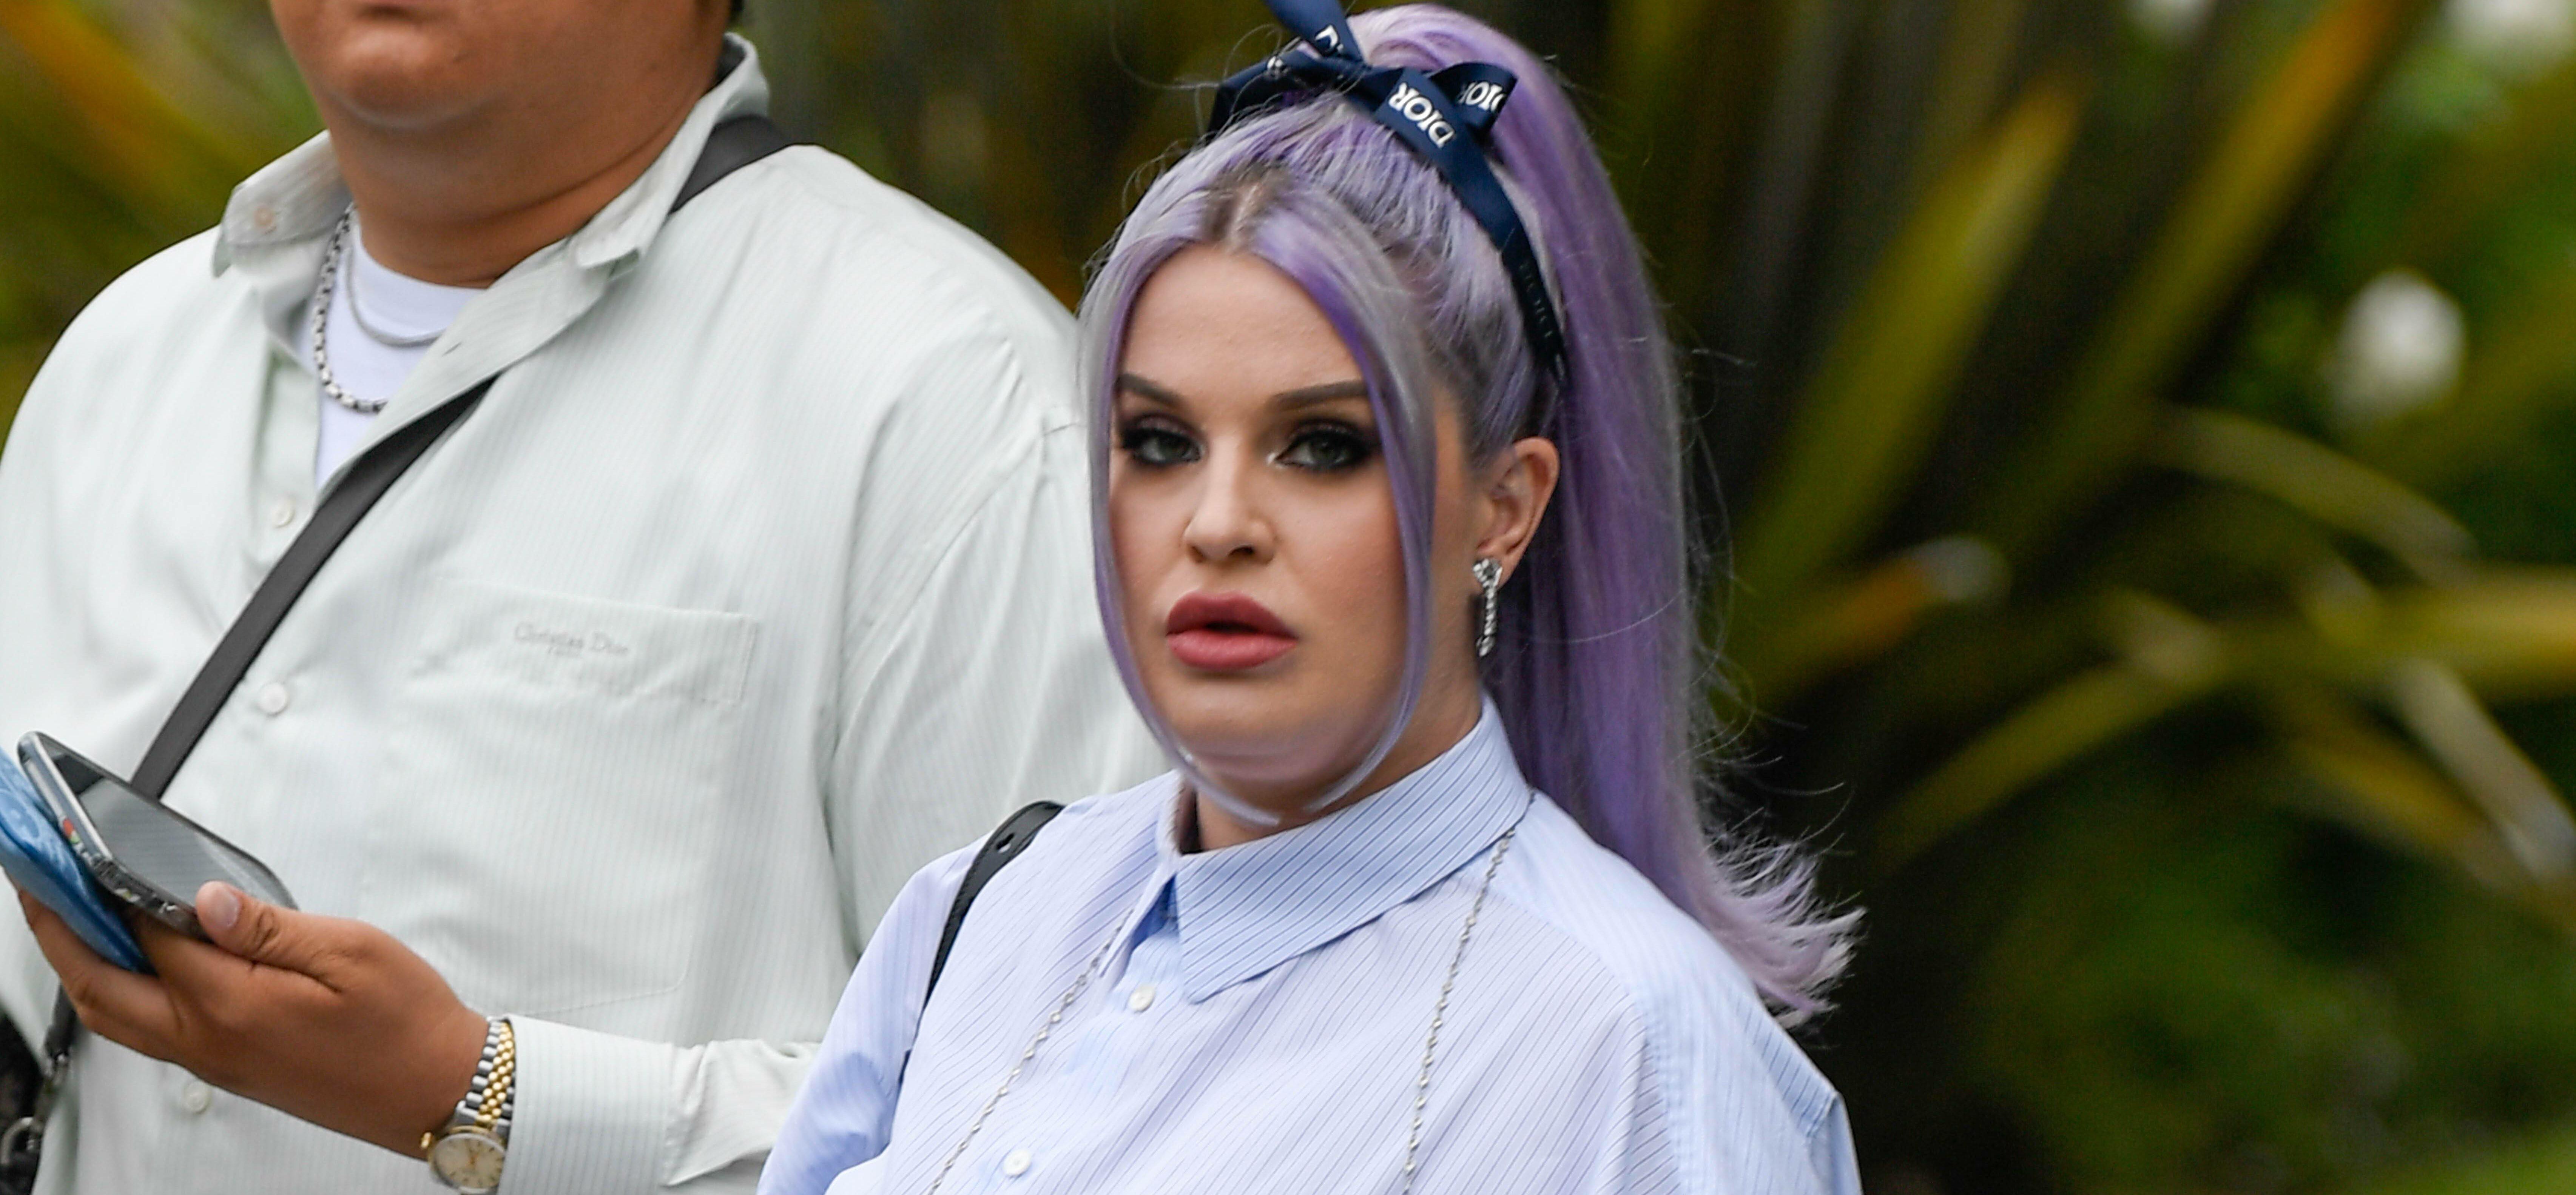 Kelly Osbourne’s ‘Not Ready’ To Share Her Baby With The World After Sharon Osbourne Blabs About Grandson